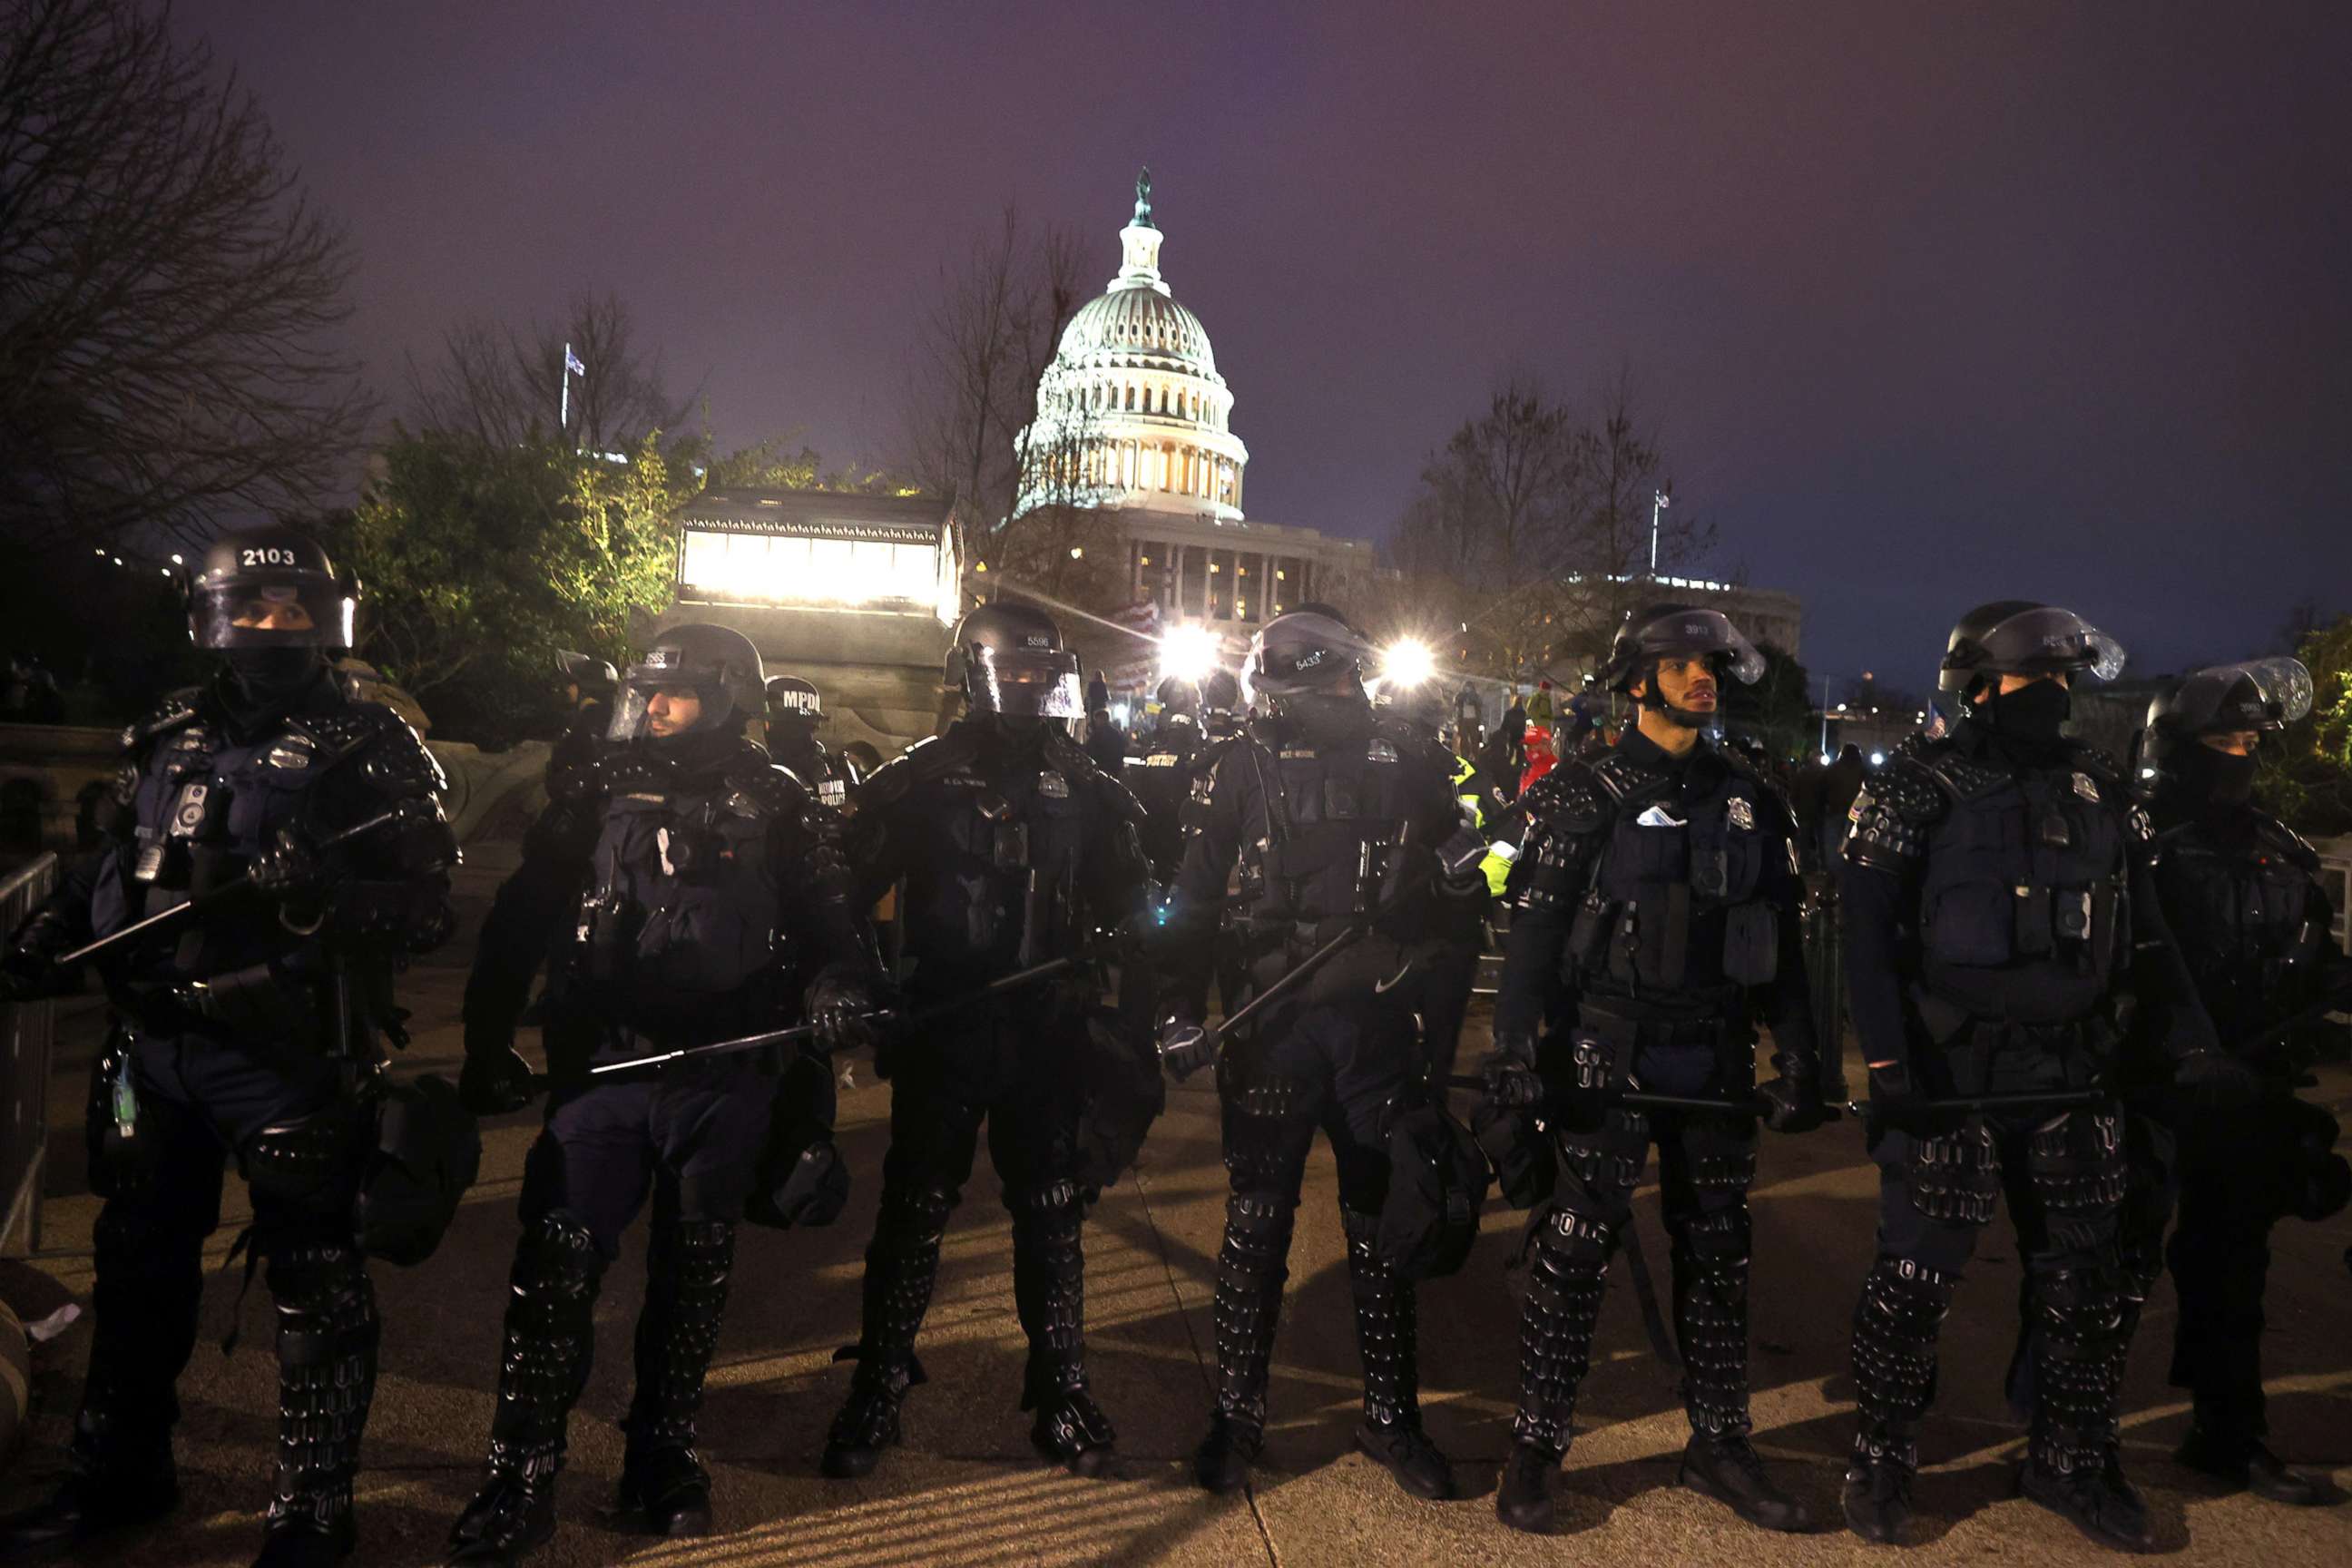 PHOTO: Police officers in riot gear line up as protesters gather on the U.S. Capitol Building, Jan. 6, 2021, in Washington, D.C.